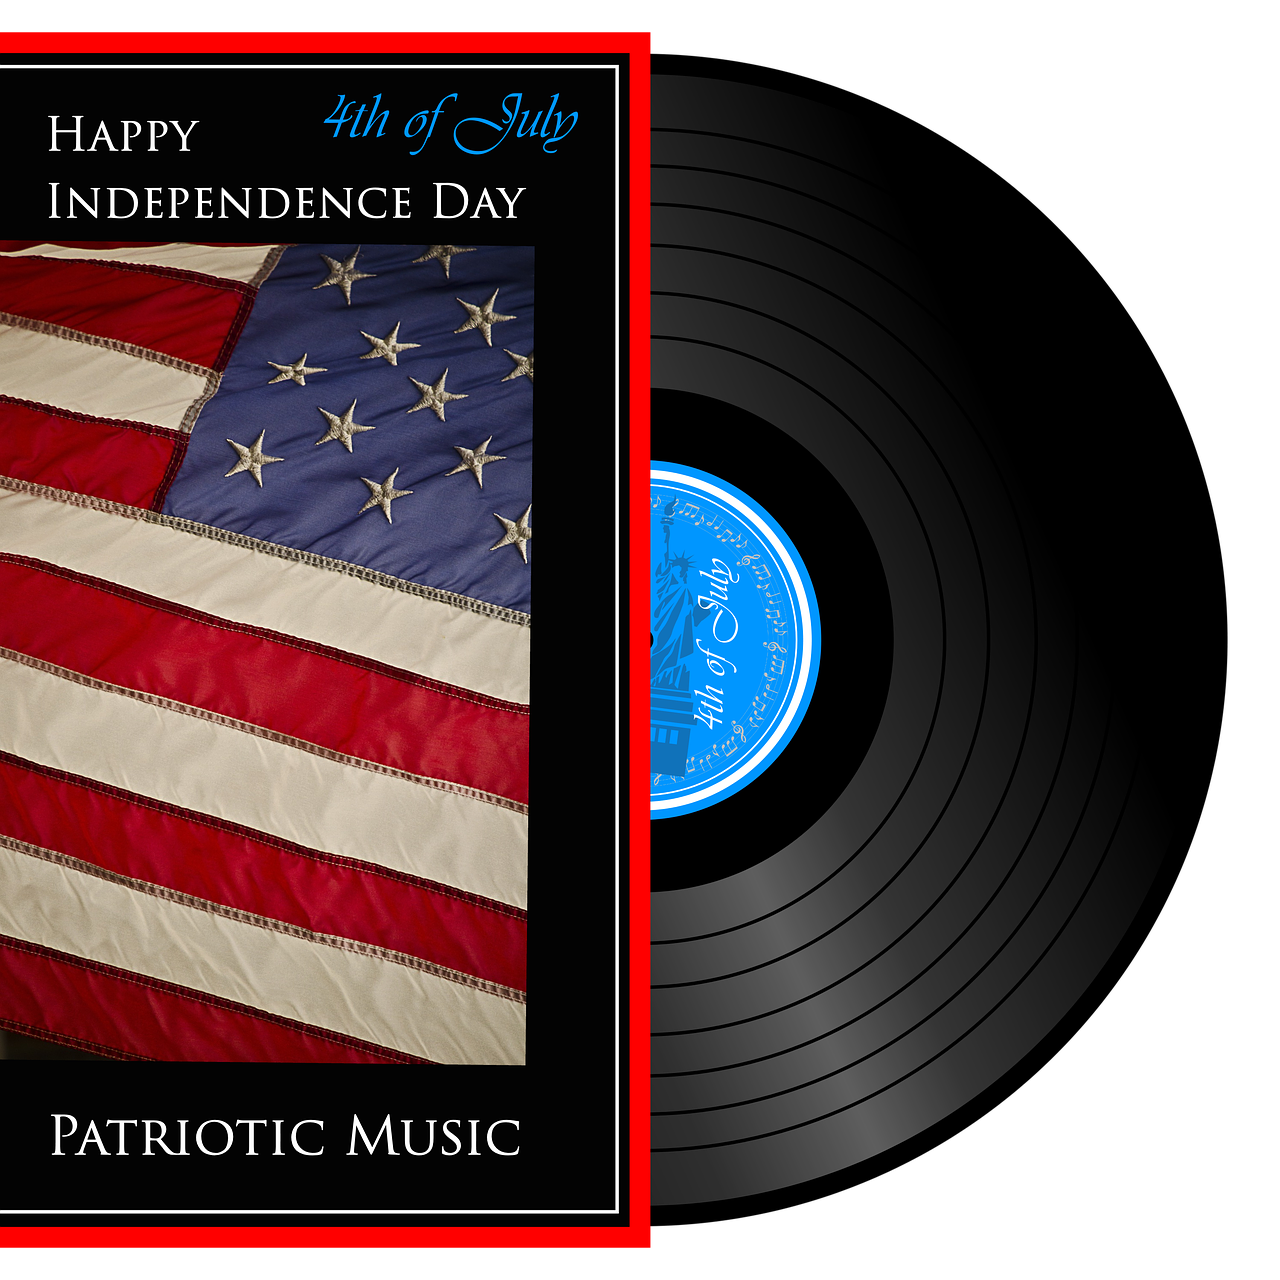 independence day  vinyl  music free photo